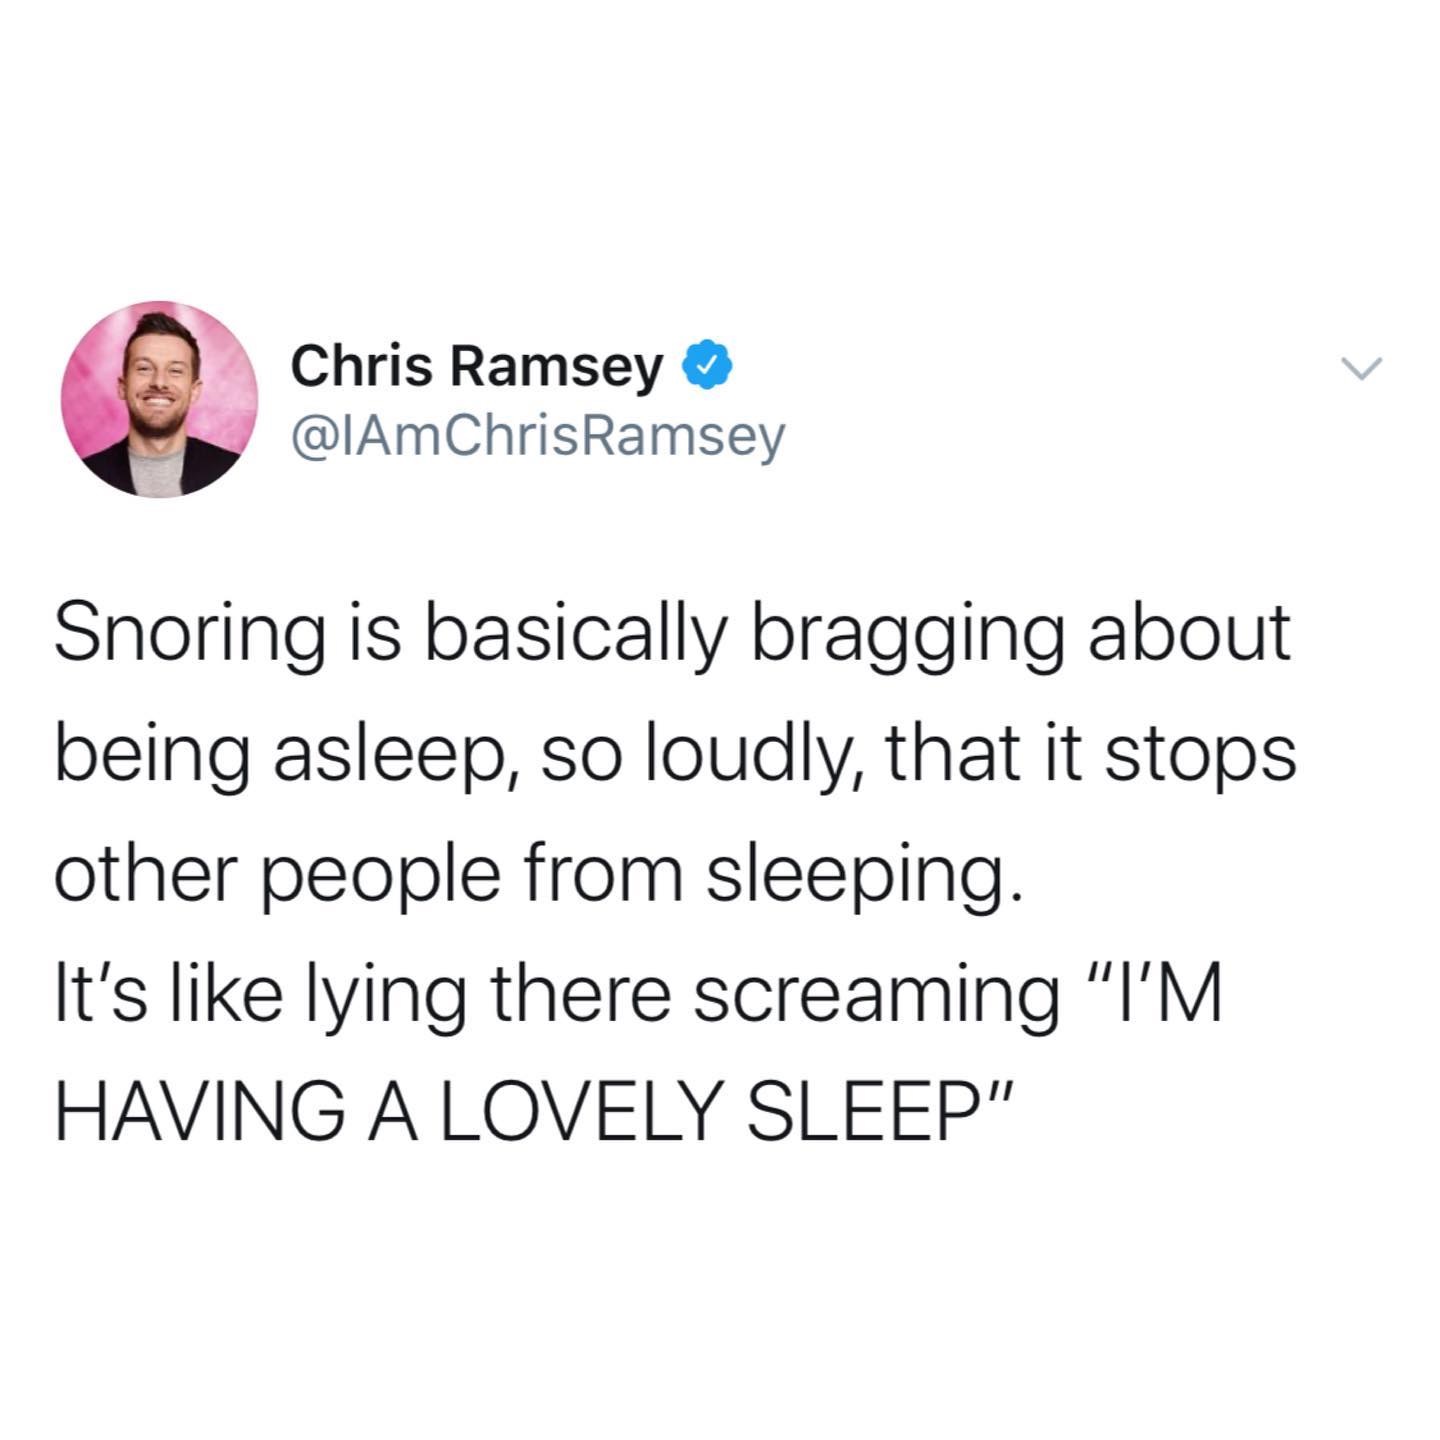 not being taken seriously meme - Chris Ramsey Snoring is basically bragging about being asleep, so loudly, that it stops other people from sleeping. It's lying there screaming